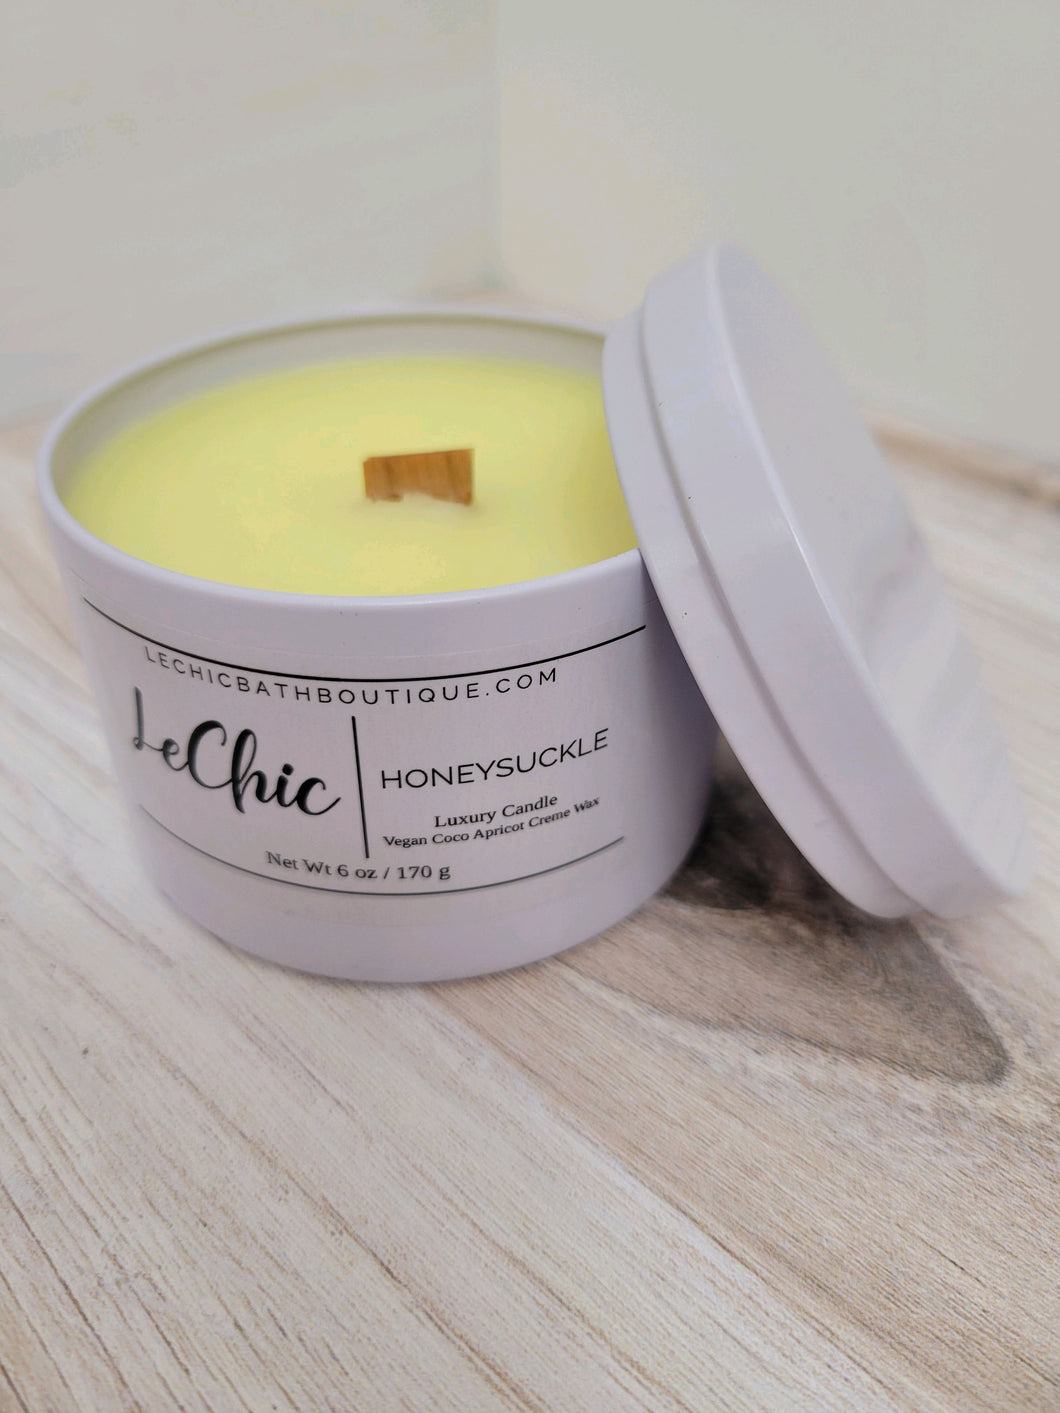 Candle ~ HONEYSUCKLE white tin coco apricot creme wax